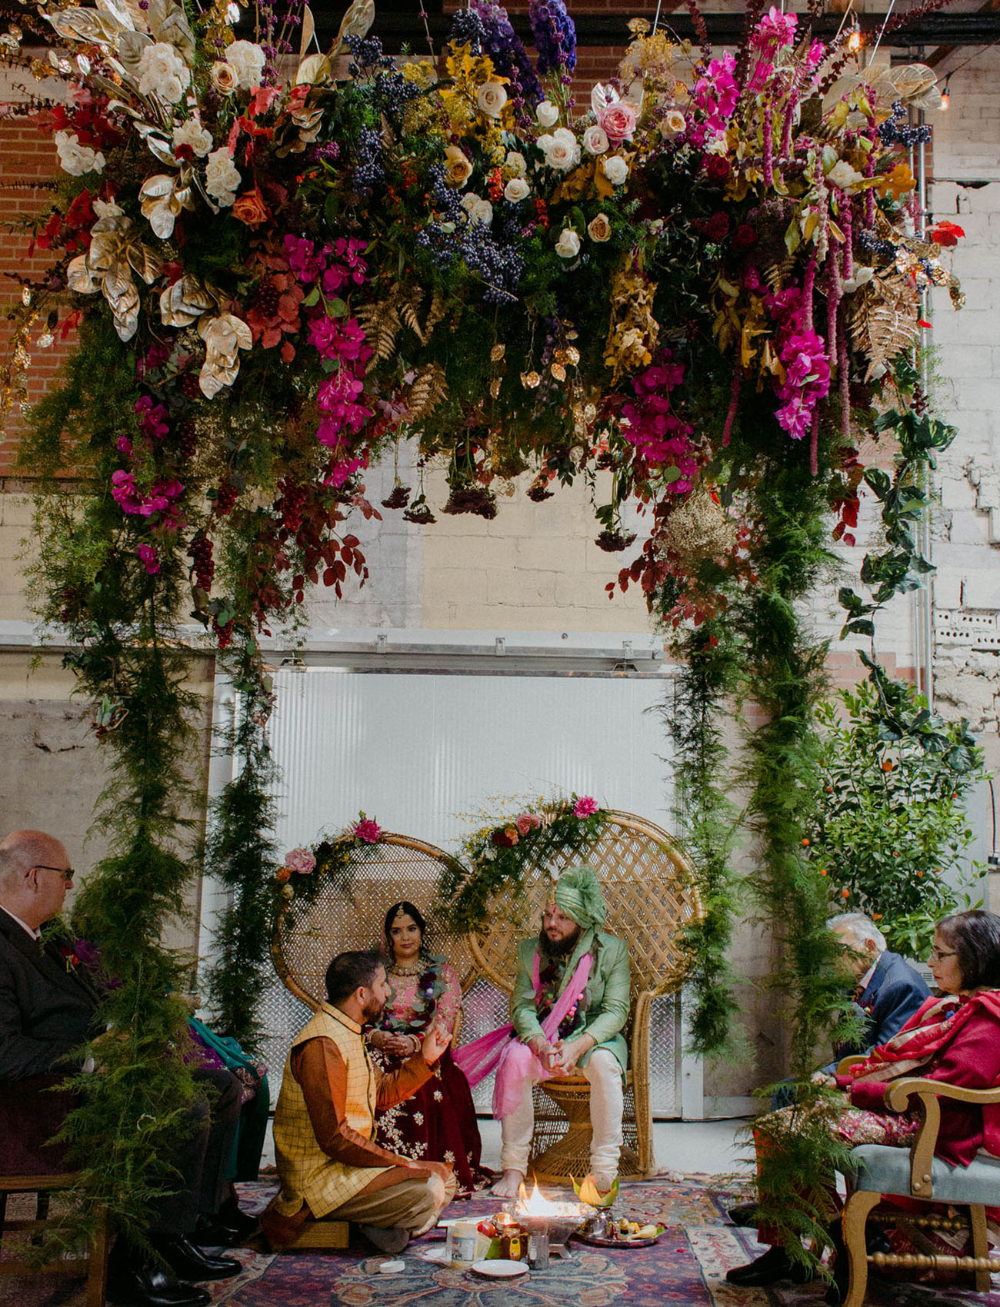 Eclectic + Colorful Urban Indian Wedding at a Craft Brewery! | Green Wedding Shoes -   18 wedding Indian ideas